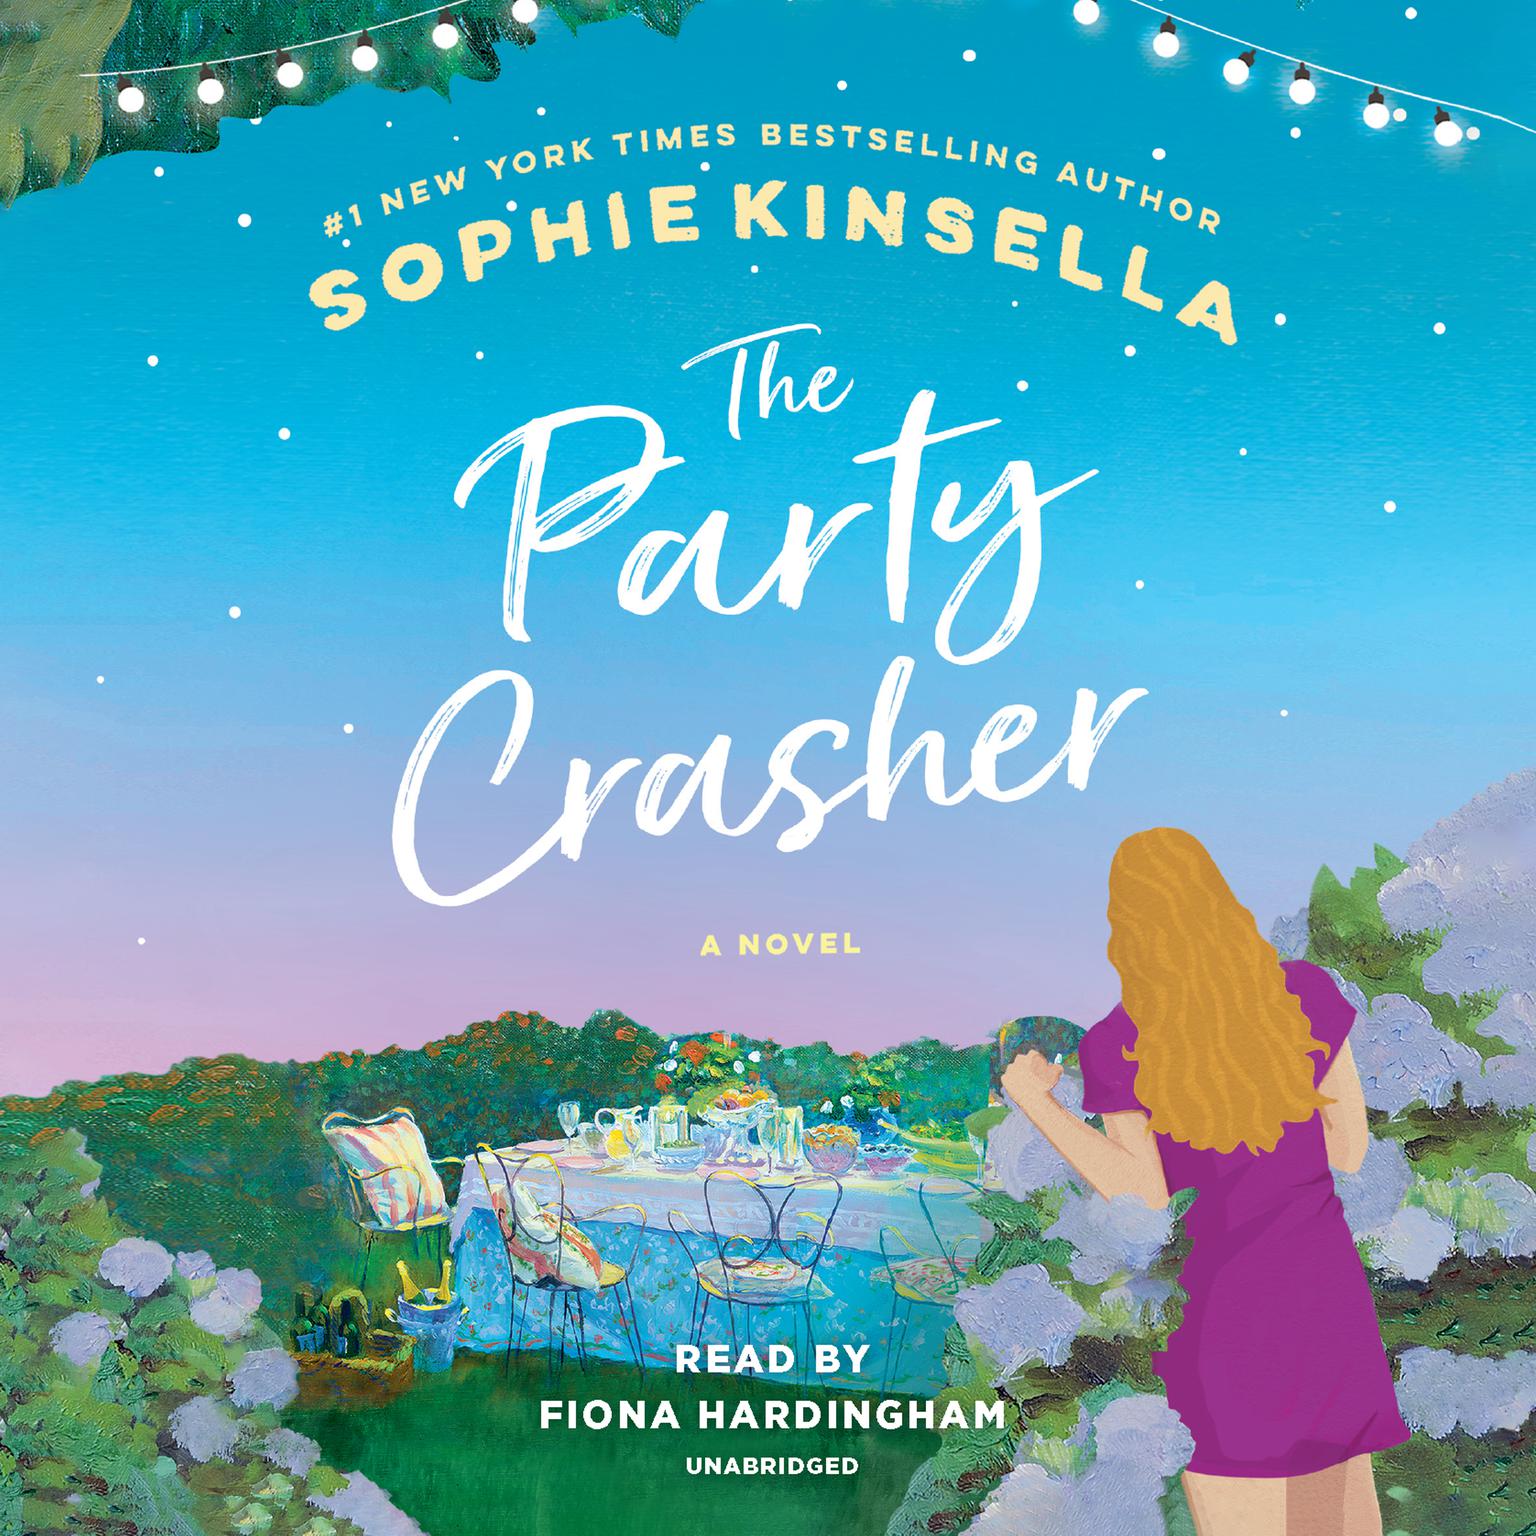 The Party Crasher: A Novel Audiobook, by Sophie Kinsella